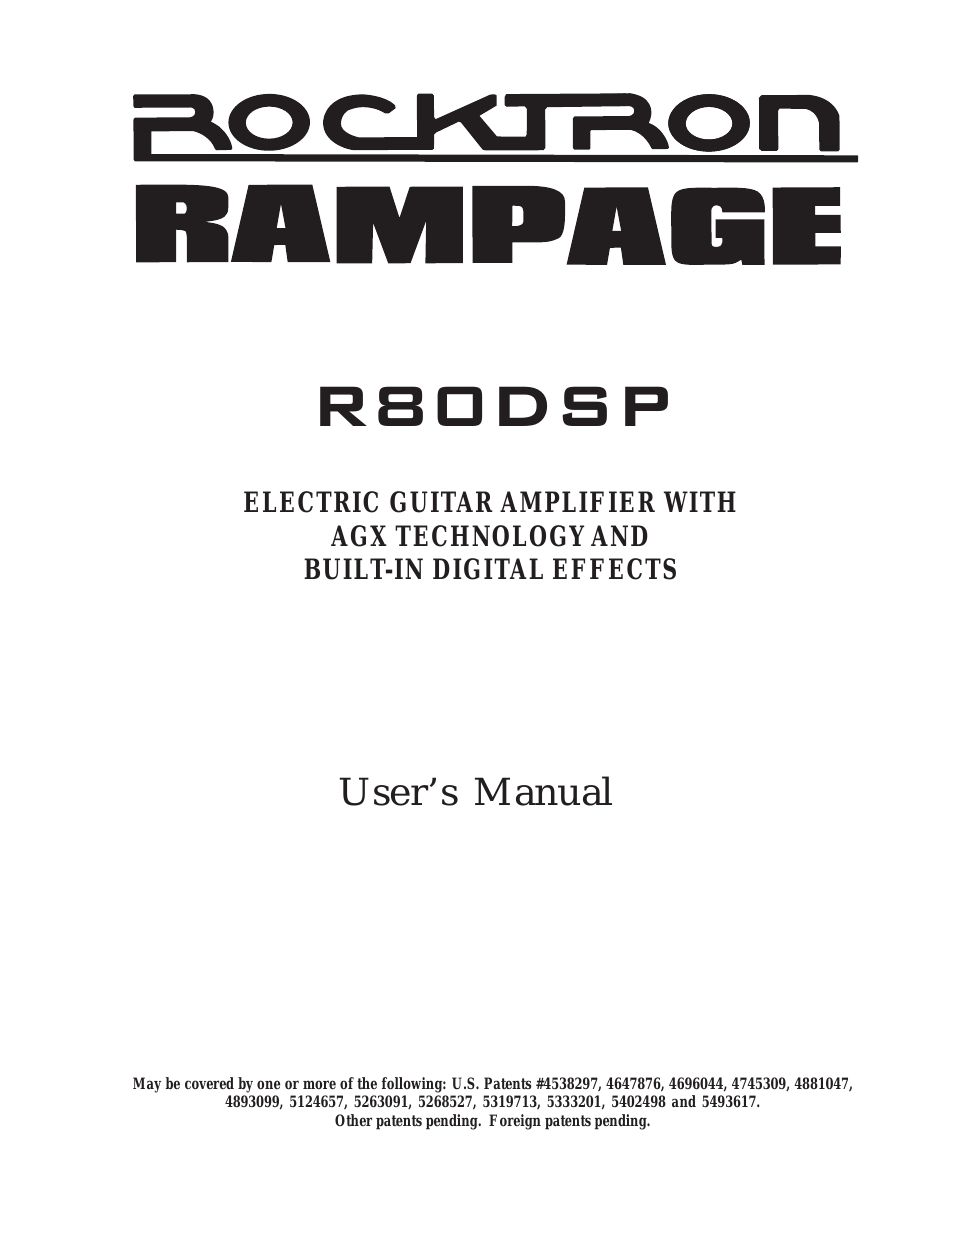 Rampage R80 DSP